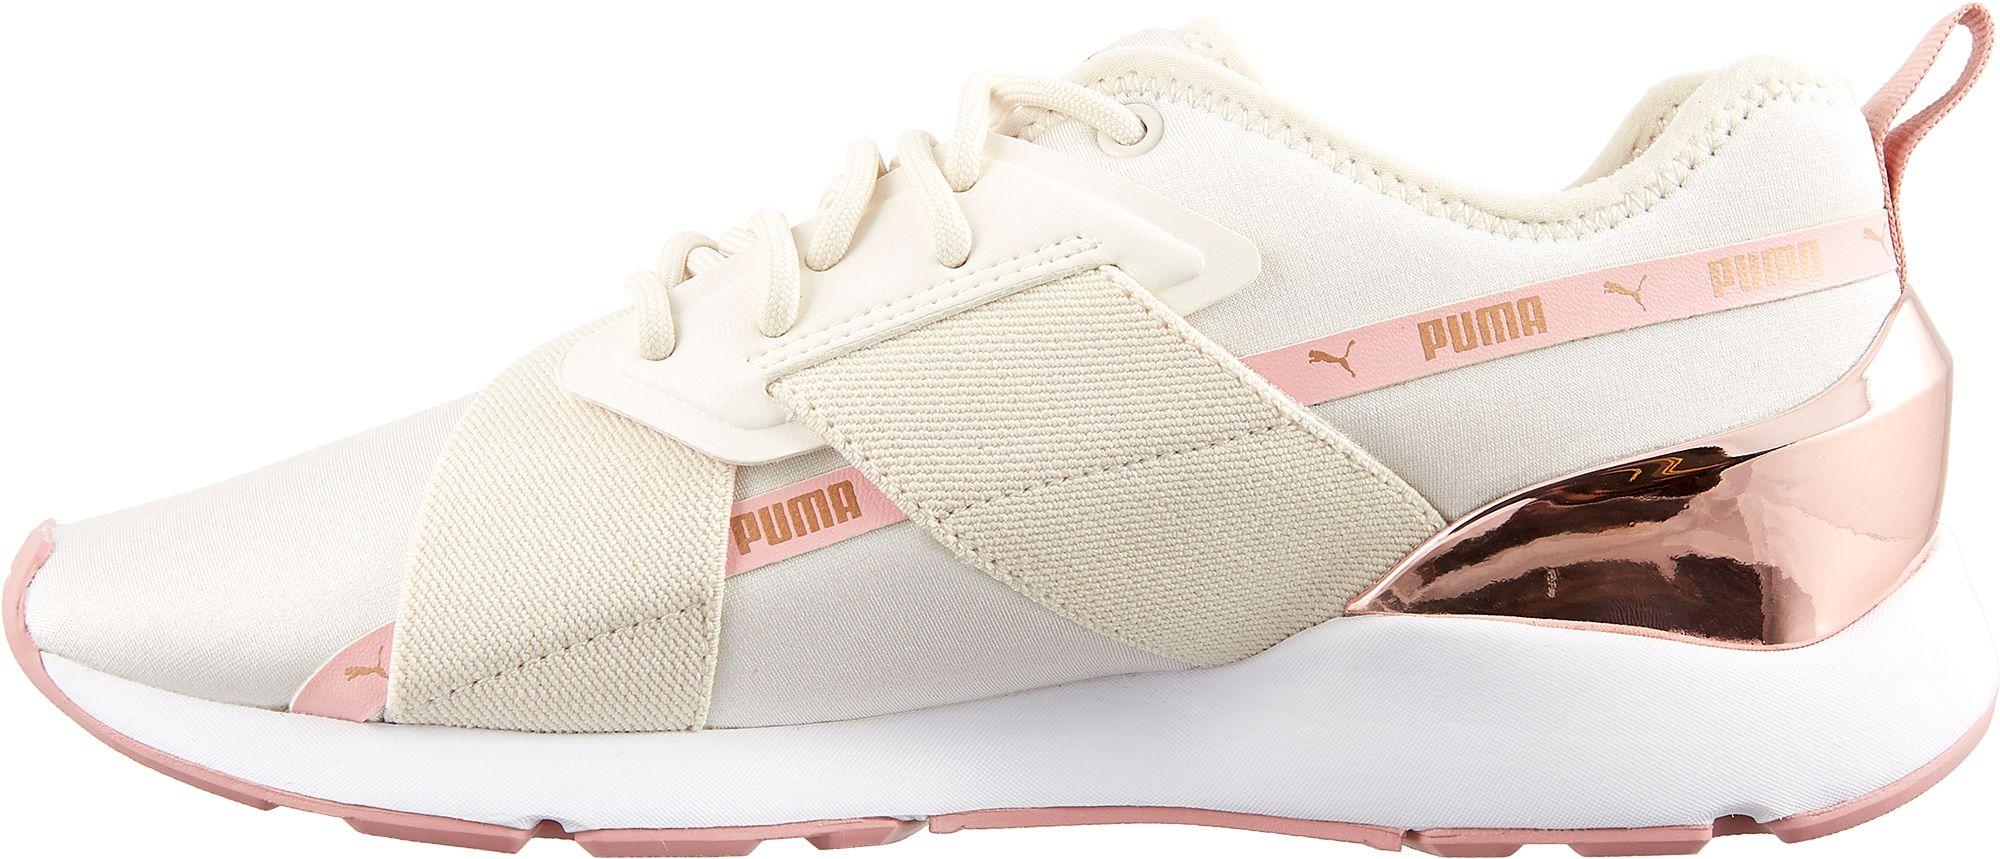 PUMA Muse X-2 Metallic Shoes in Pink/Rose/Gold (Pink) - Lyst